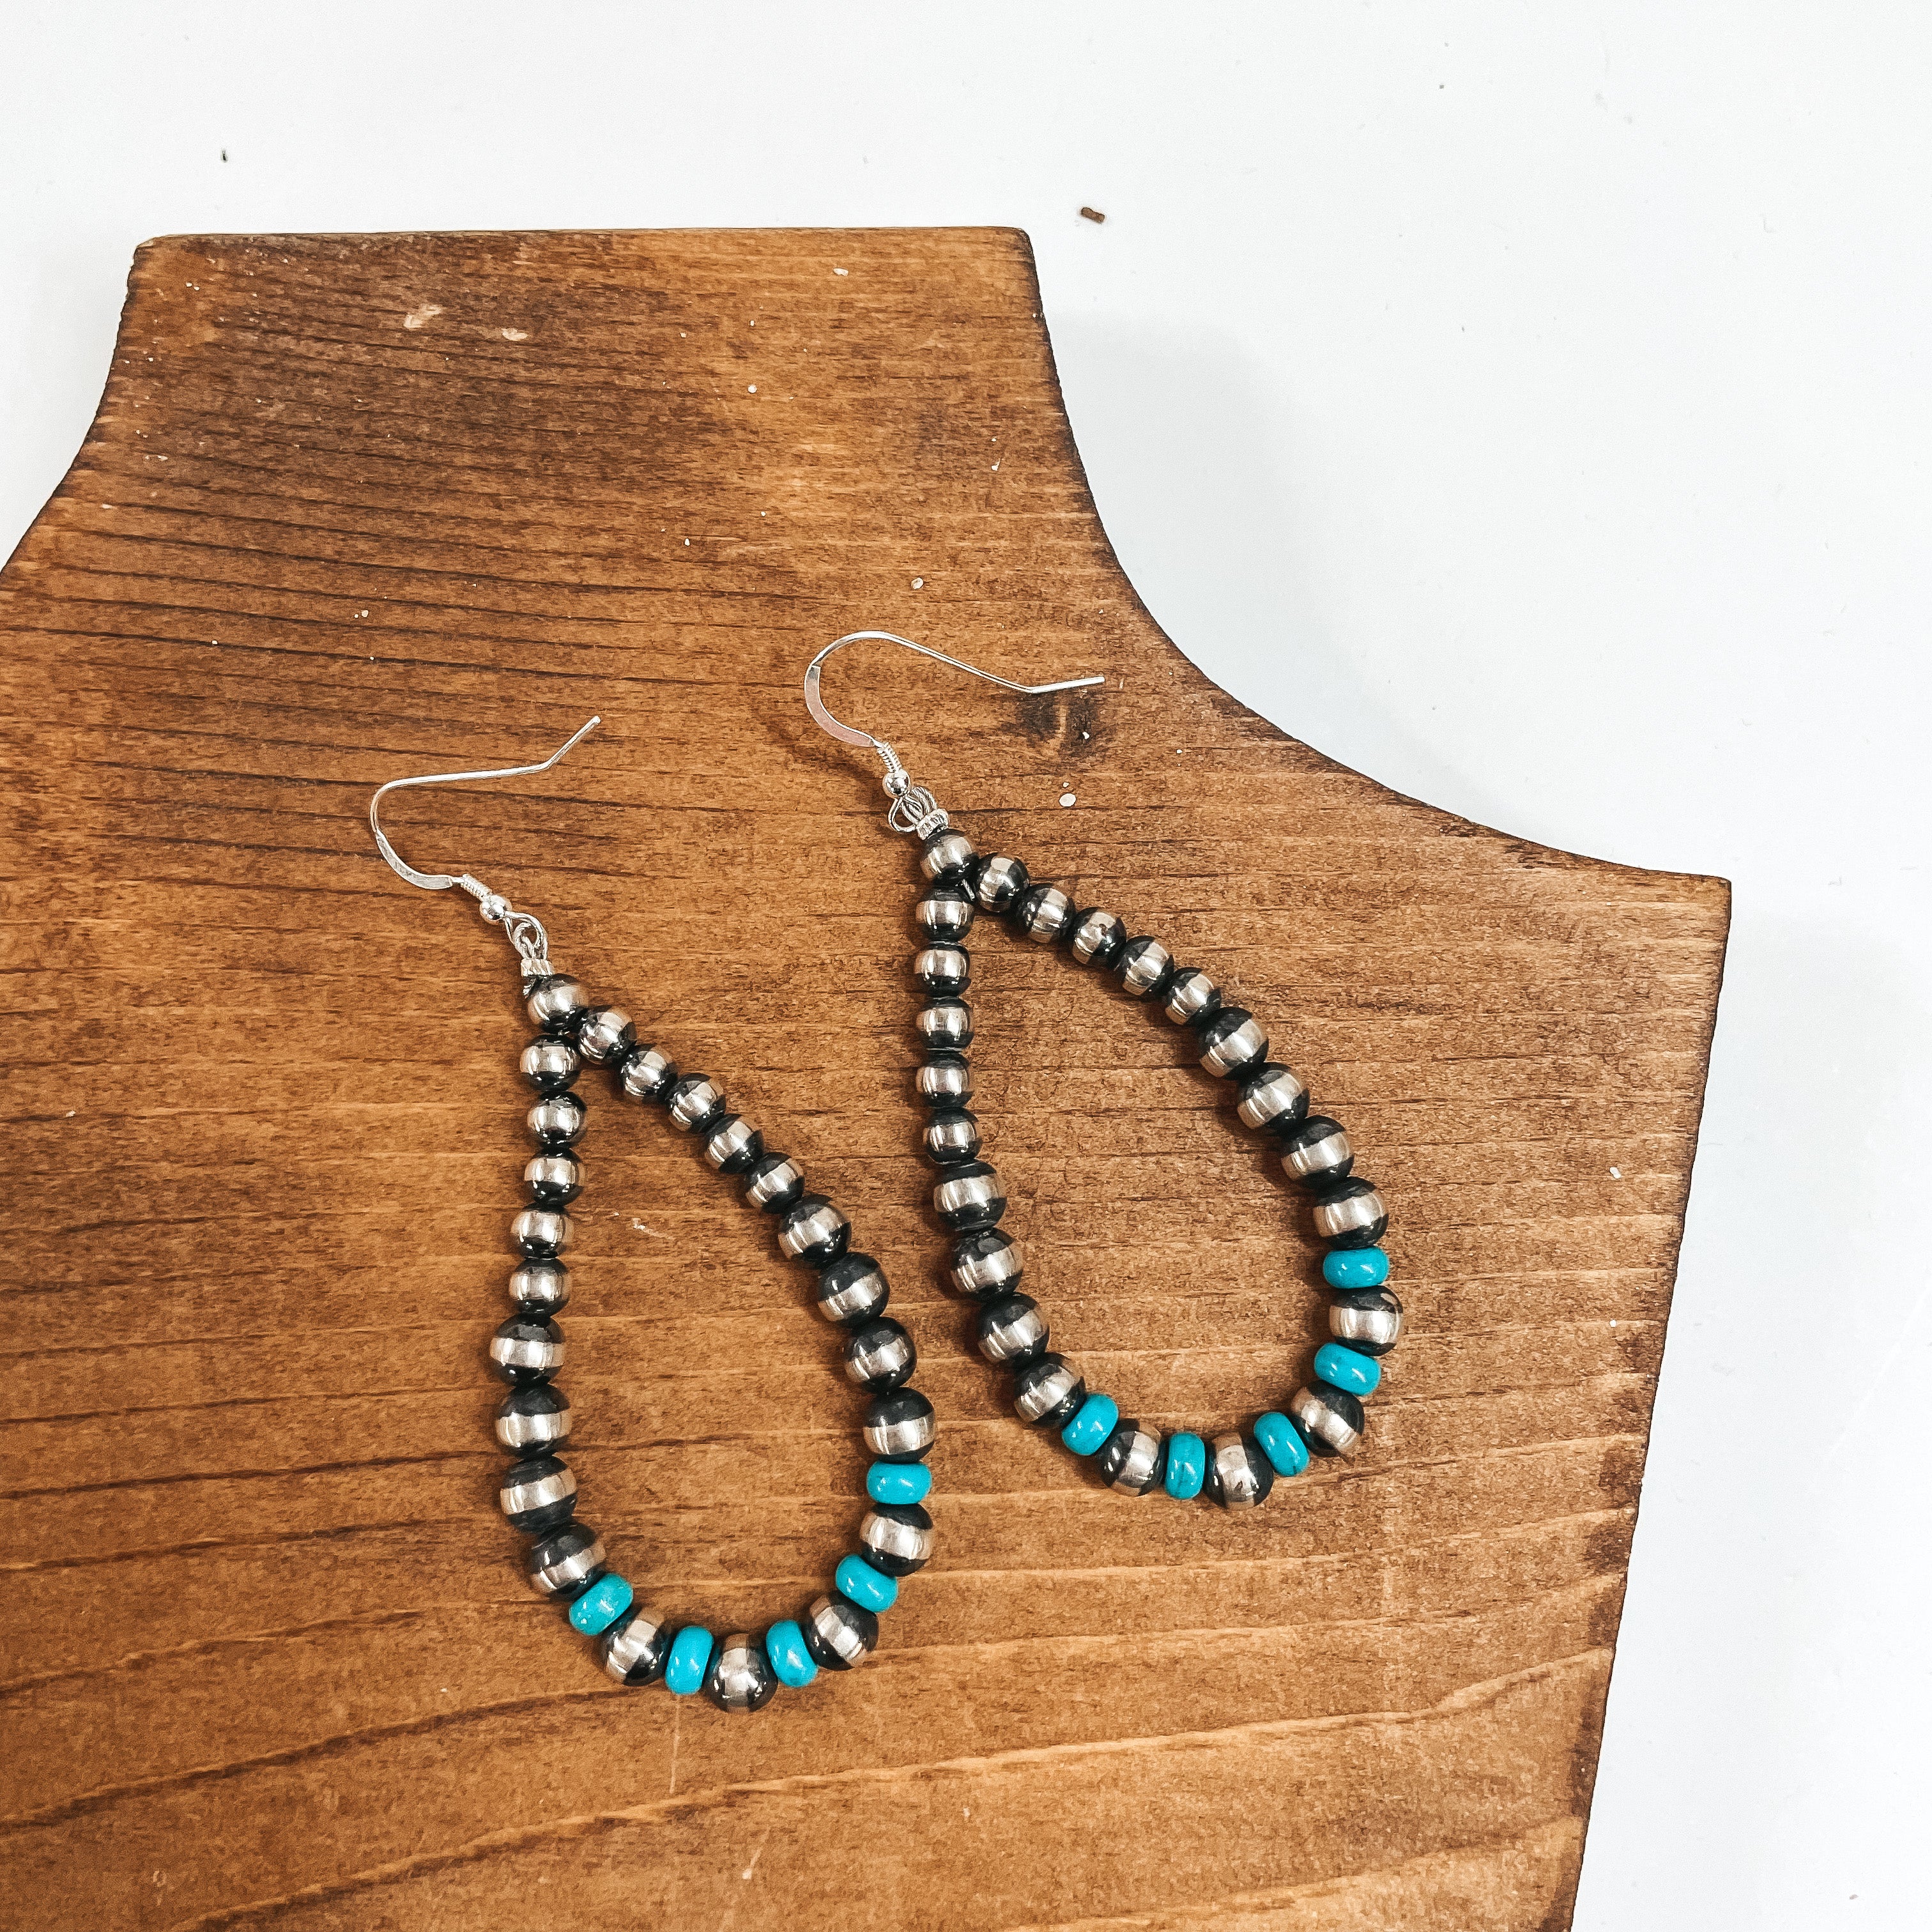 Navajo | Navajo Handmade Sterling Silver Navajo Pearl with Turquoise Spacers Teardrop Earrings - Giddy Up Glamour Boutique